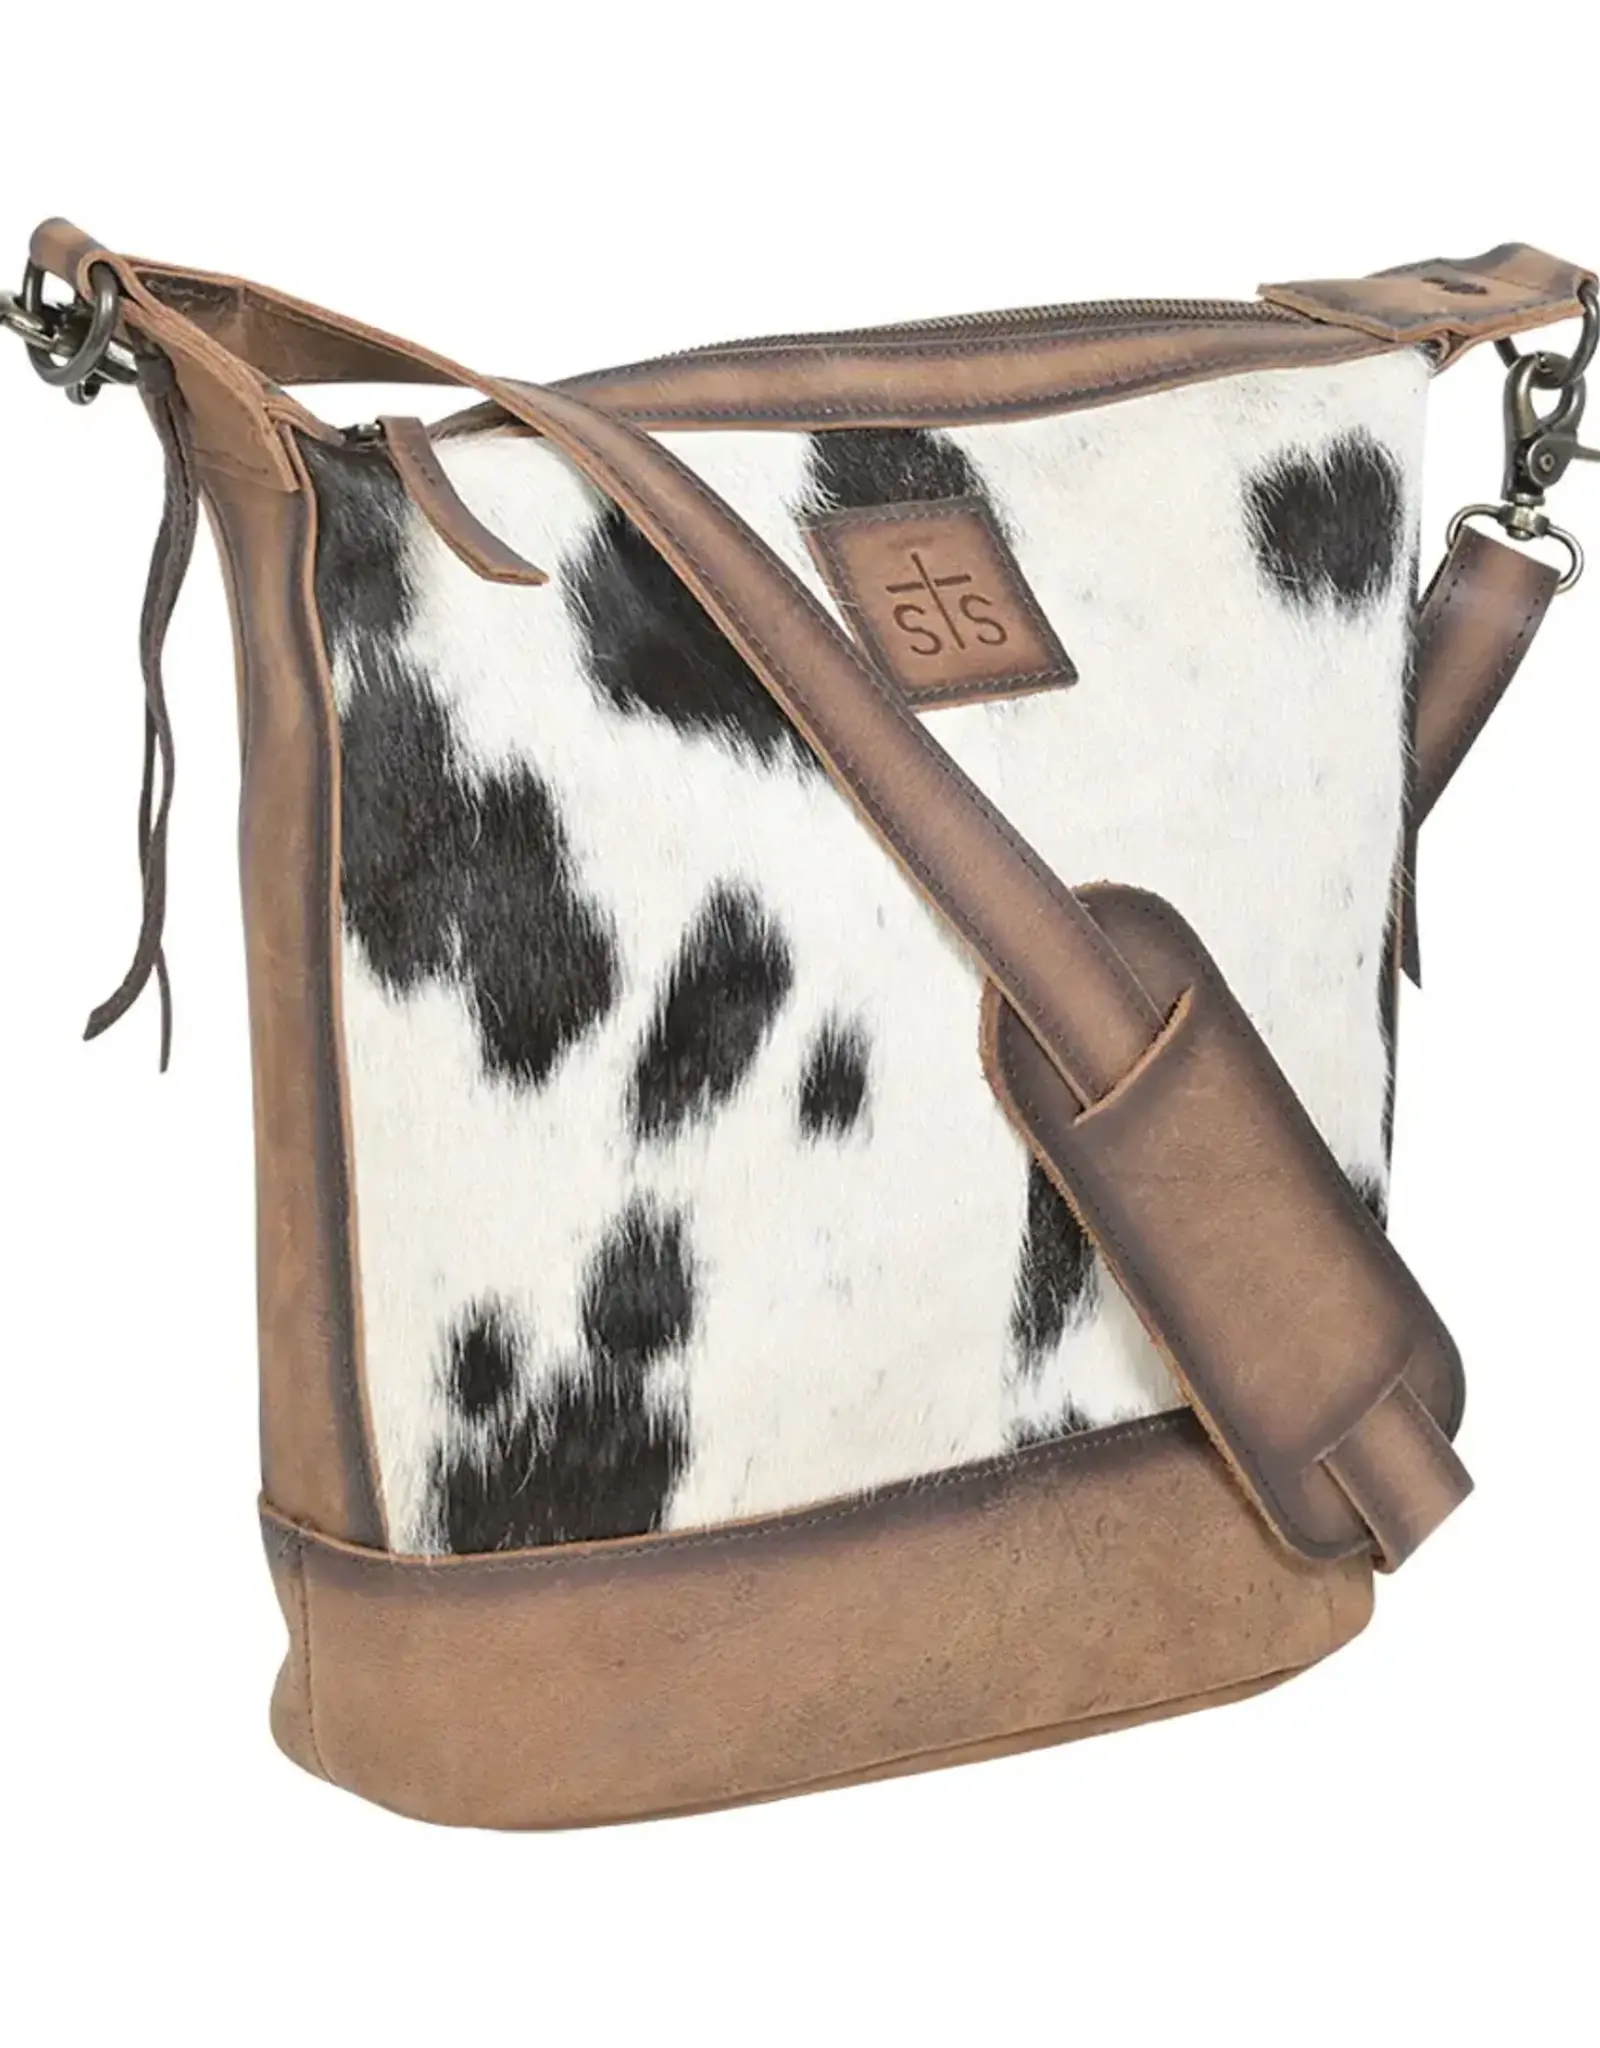 Womens STS Leather Cowhide Mailbag Purse